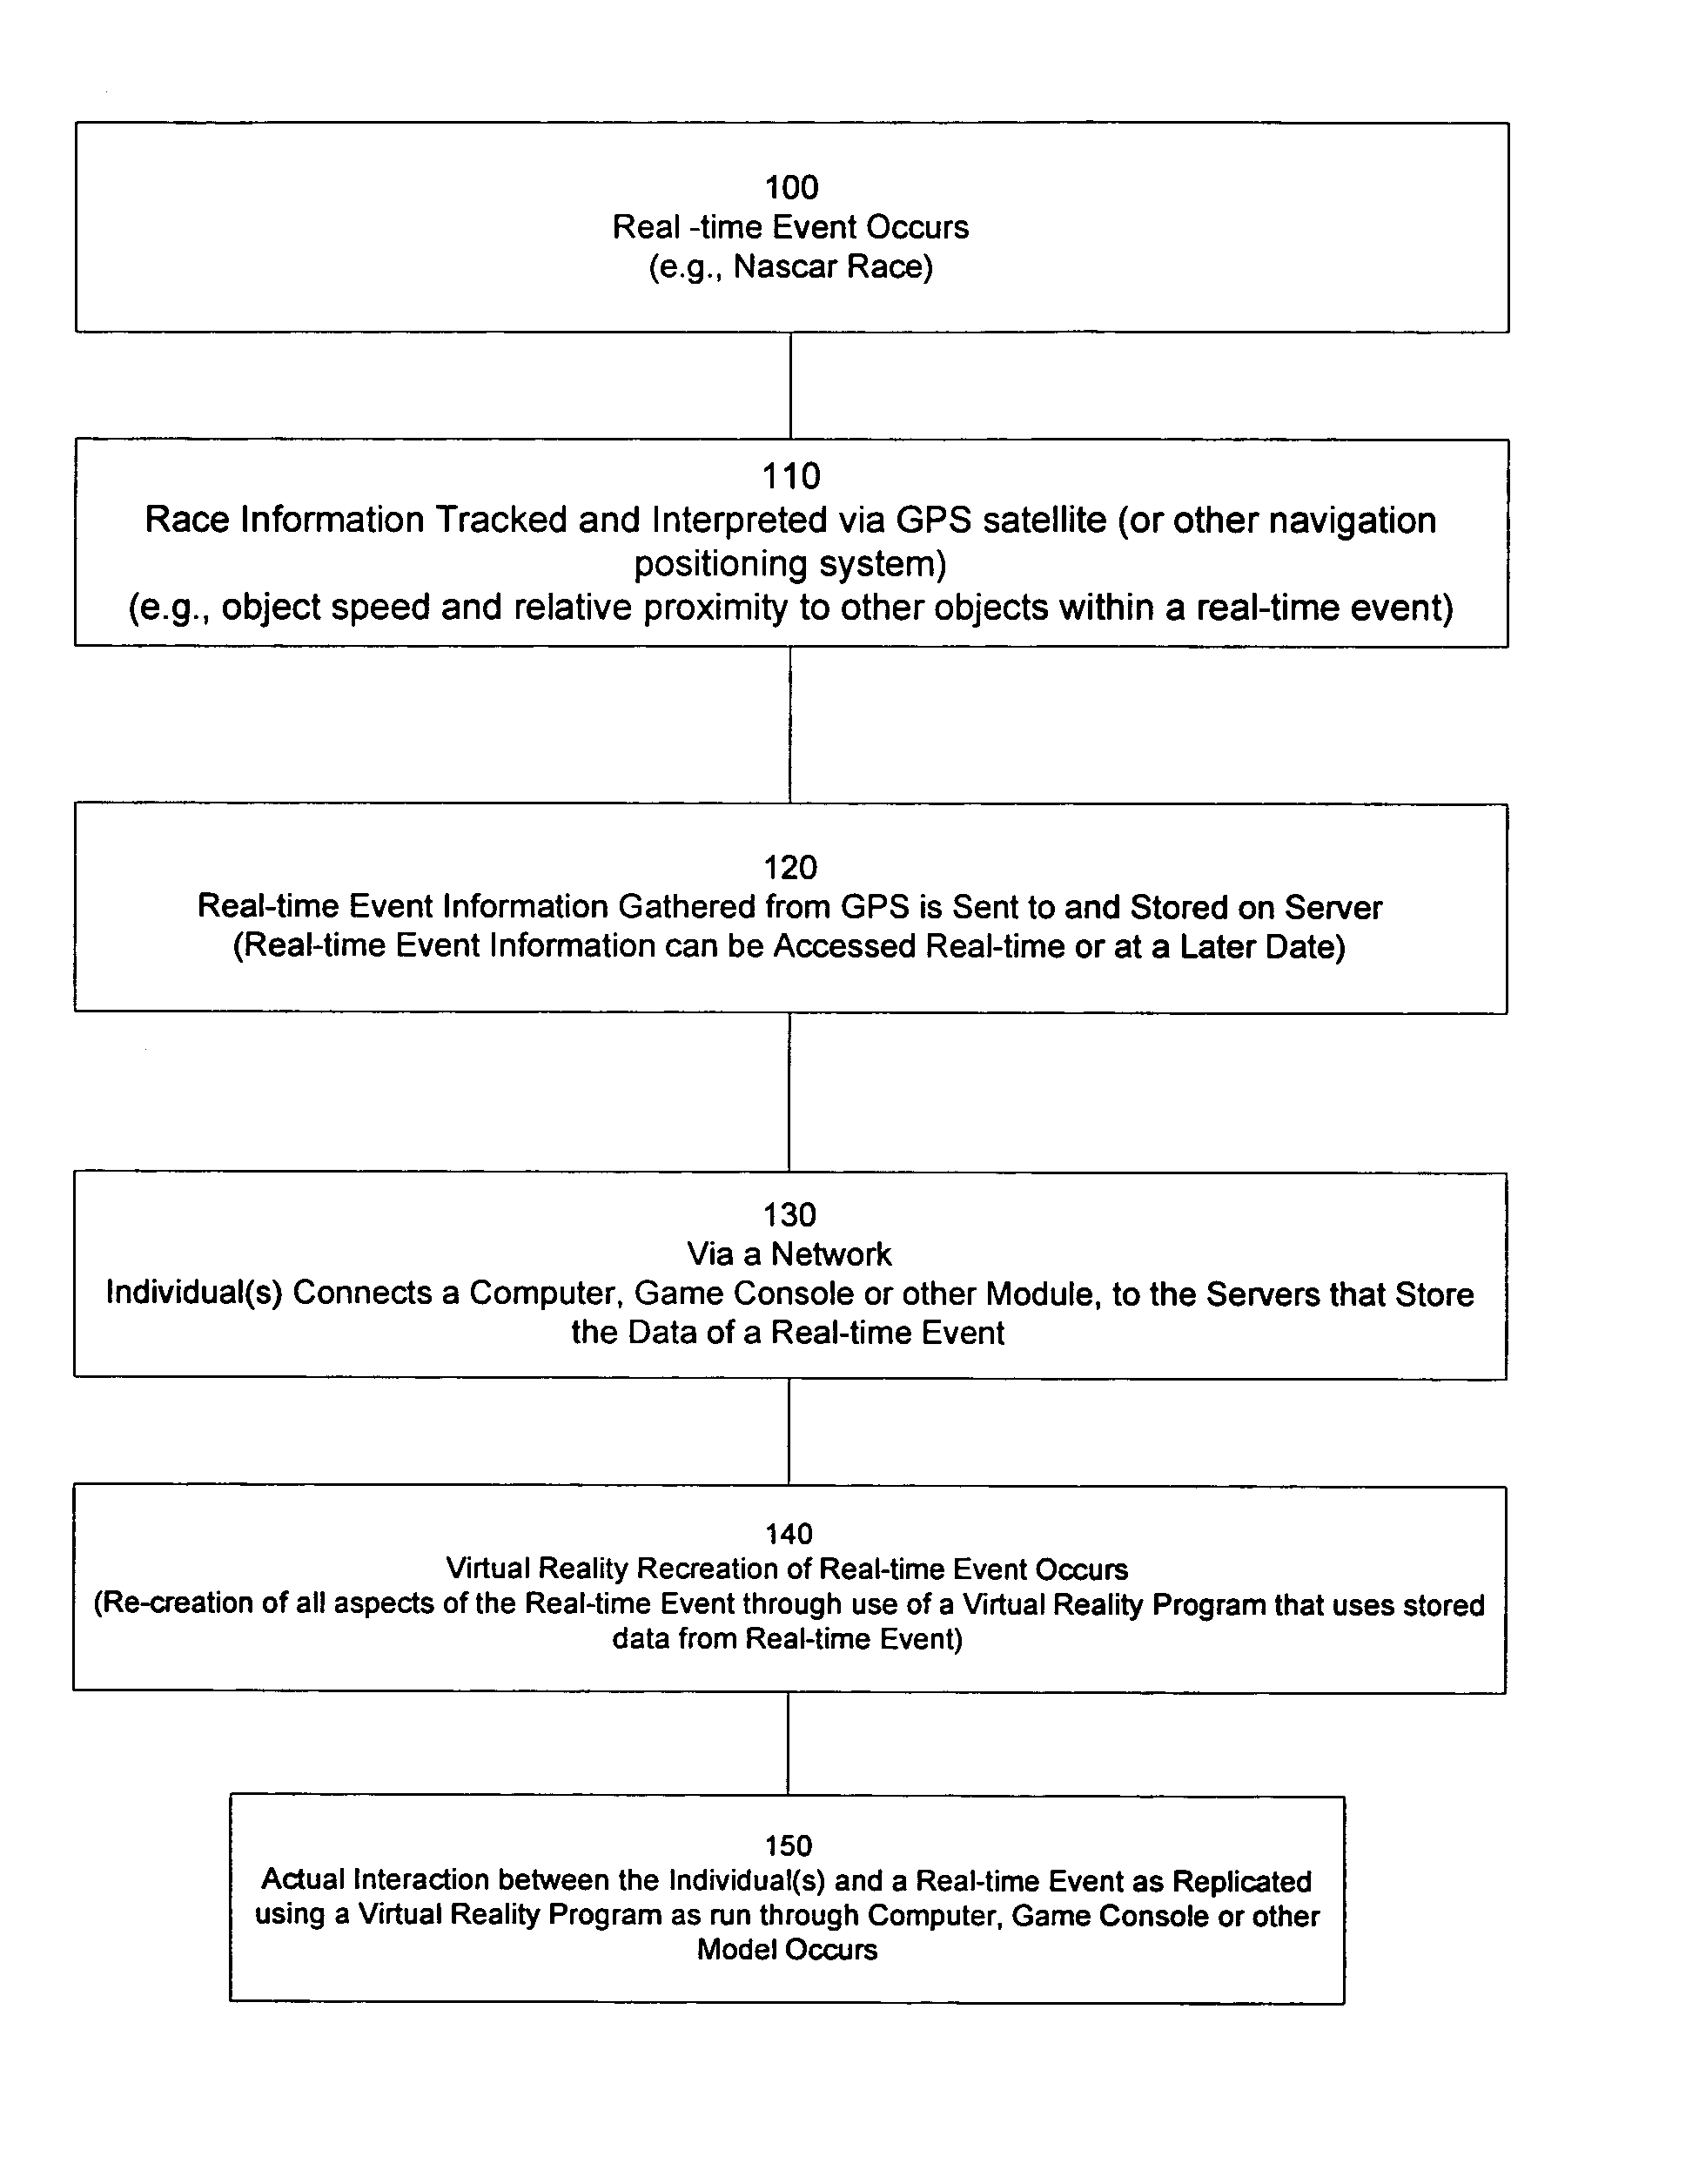 Method and system for interaction with real-time events from a remote location, through use of a computer, game console or other module